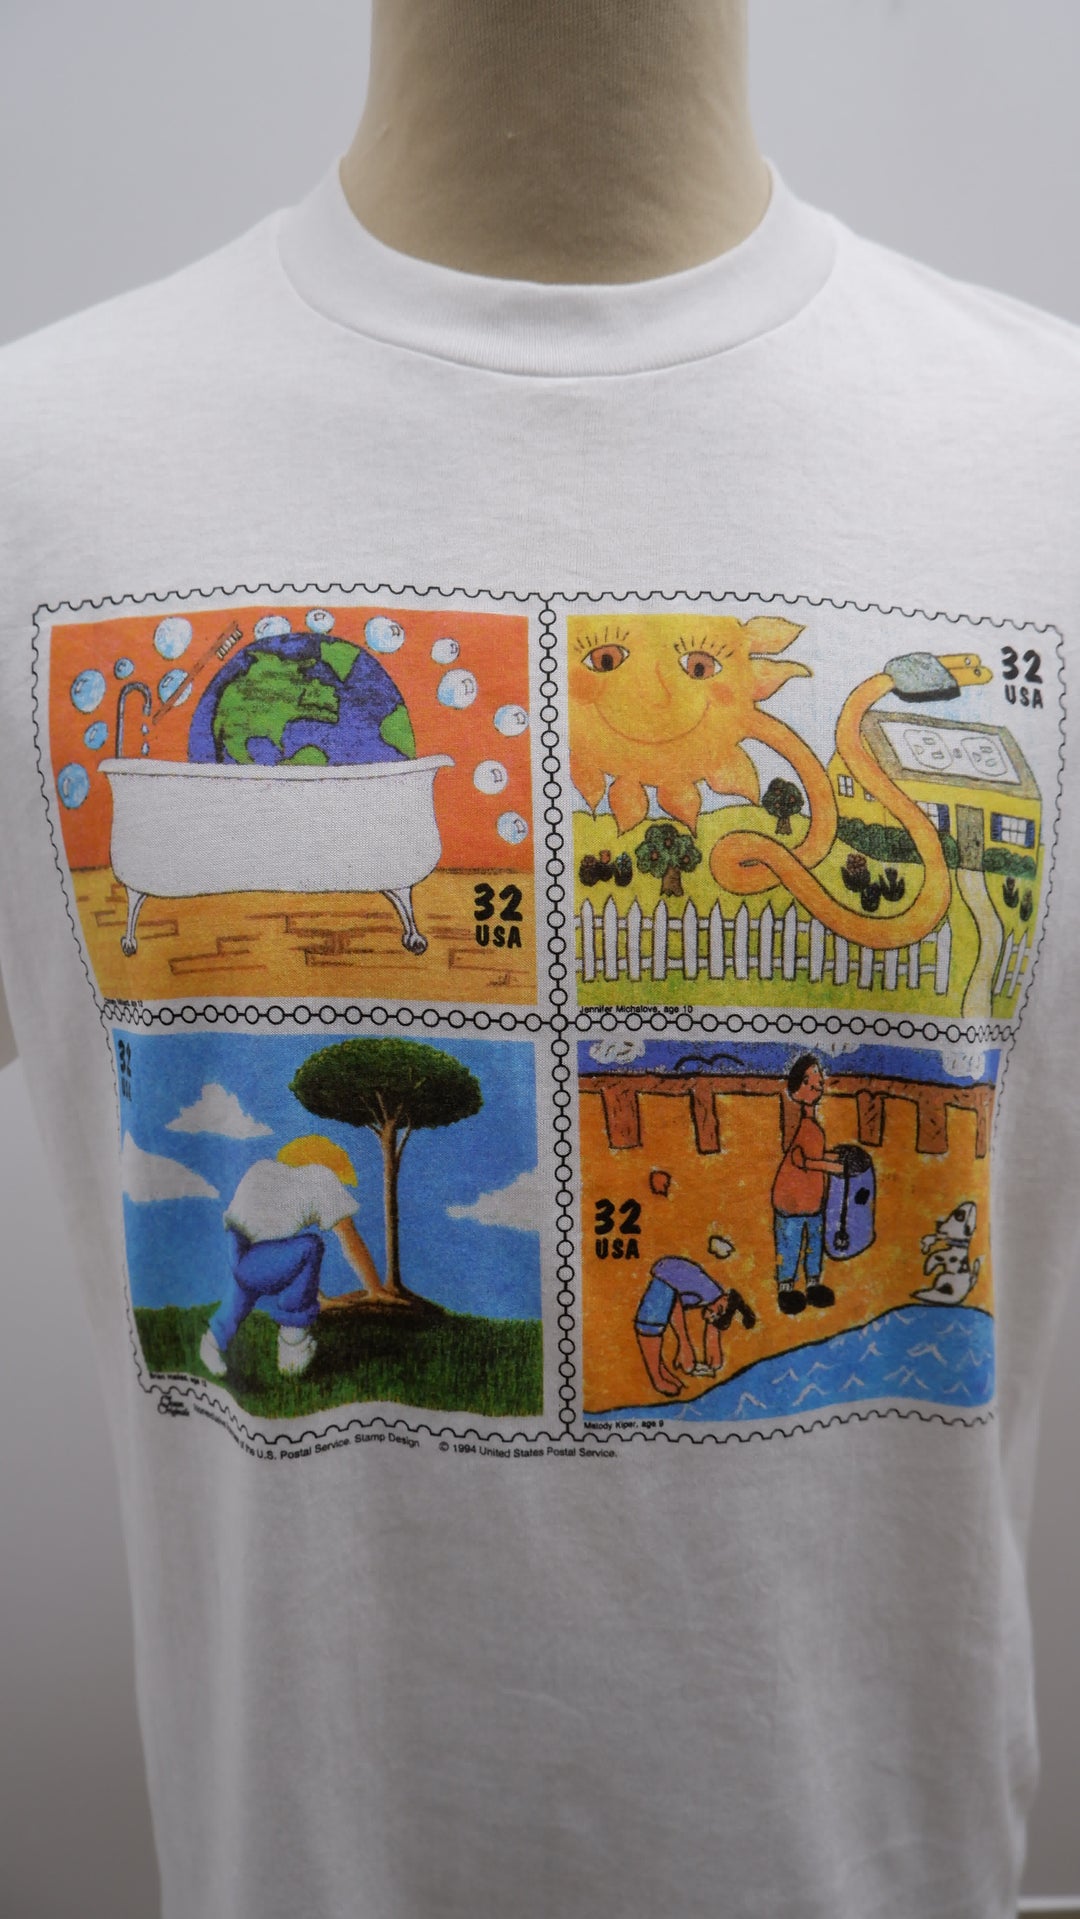 Vintage Fruit of the Loom 1994 United States Postal Service Stamp Single Stitch T-Shirt Made In USA